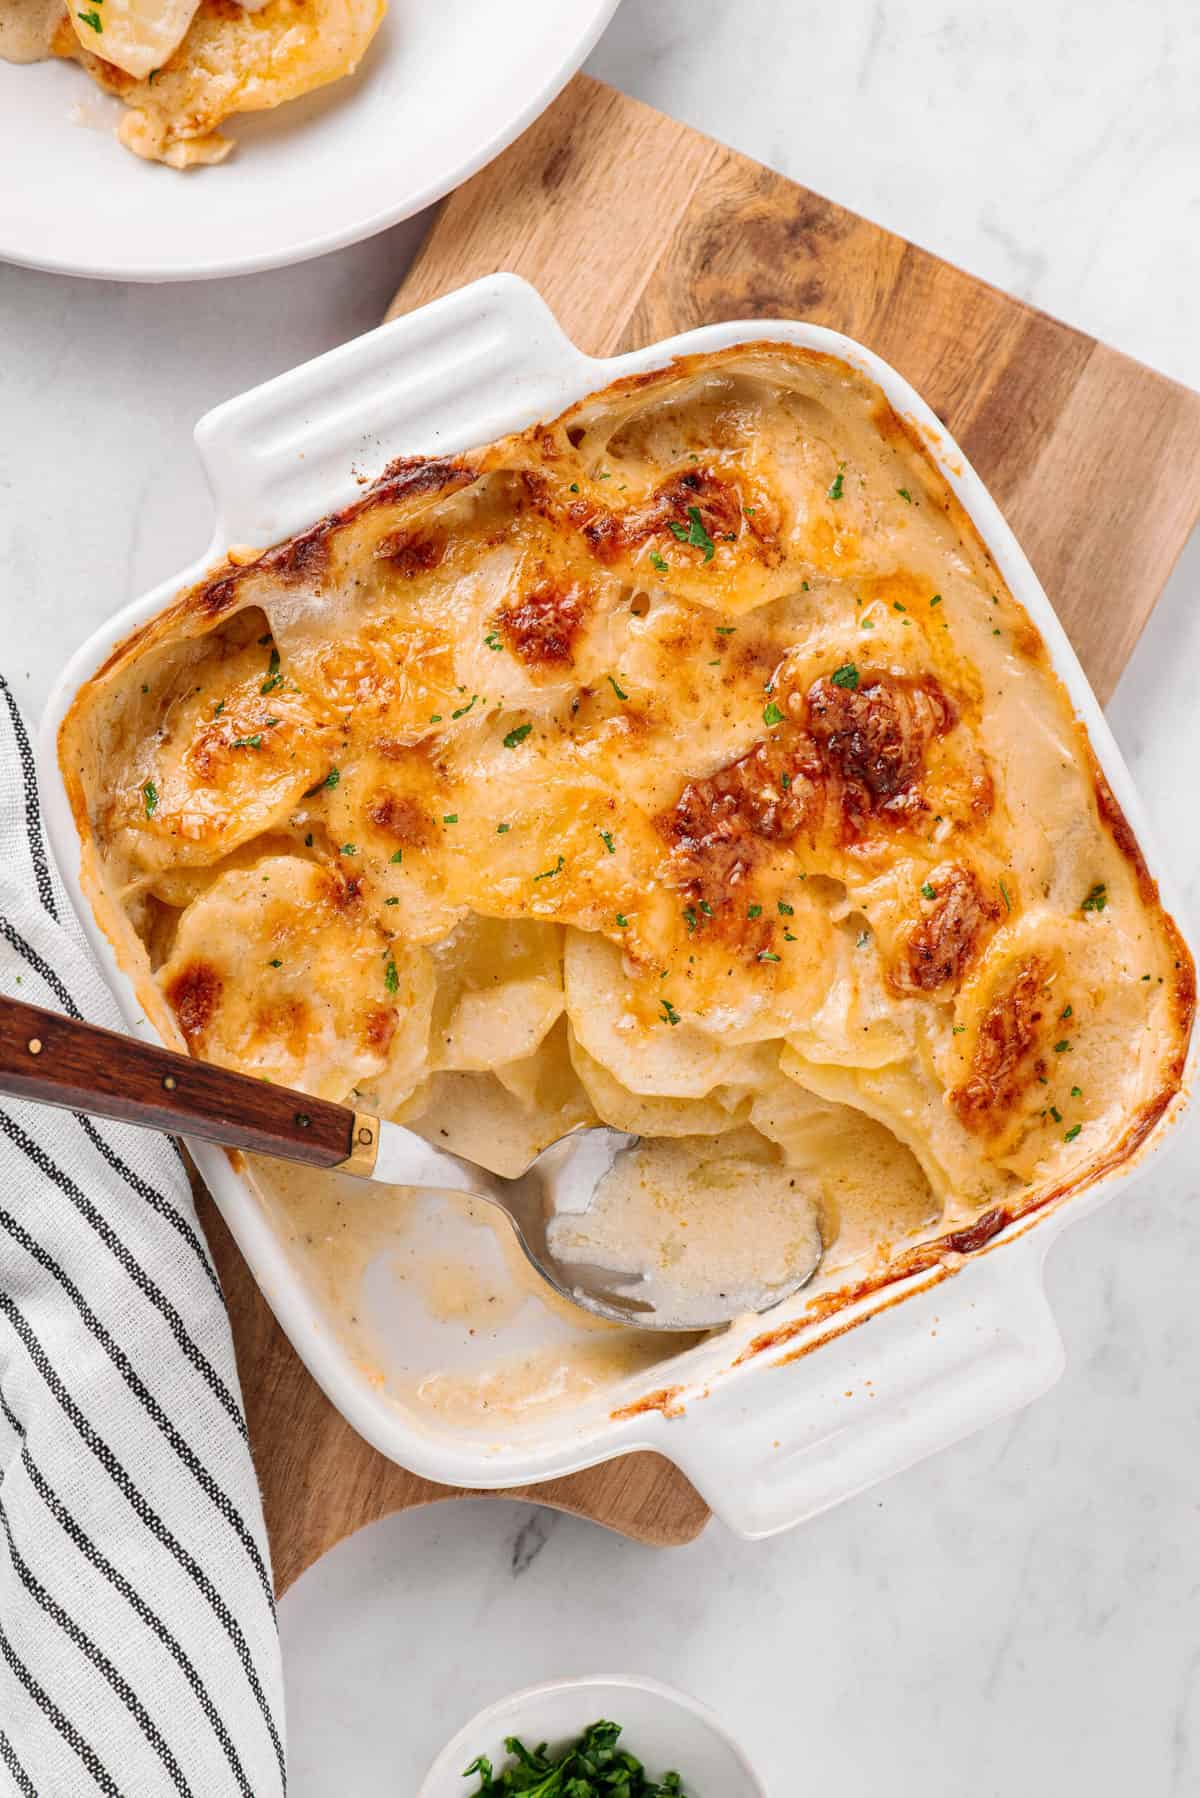 potatoes au gratin served in a white square casserole dish sitting on a wood cutting board with a spoon in the dish